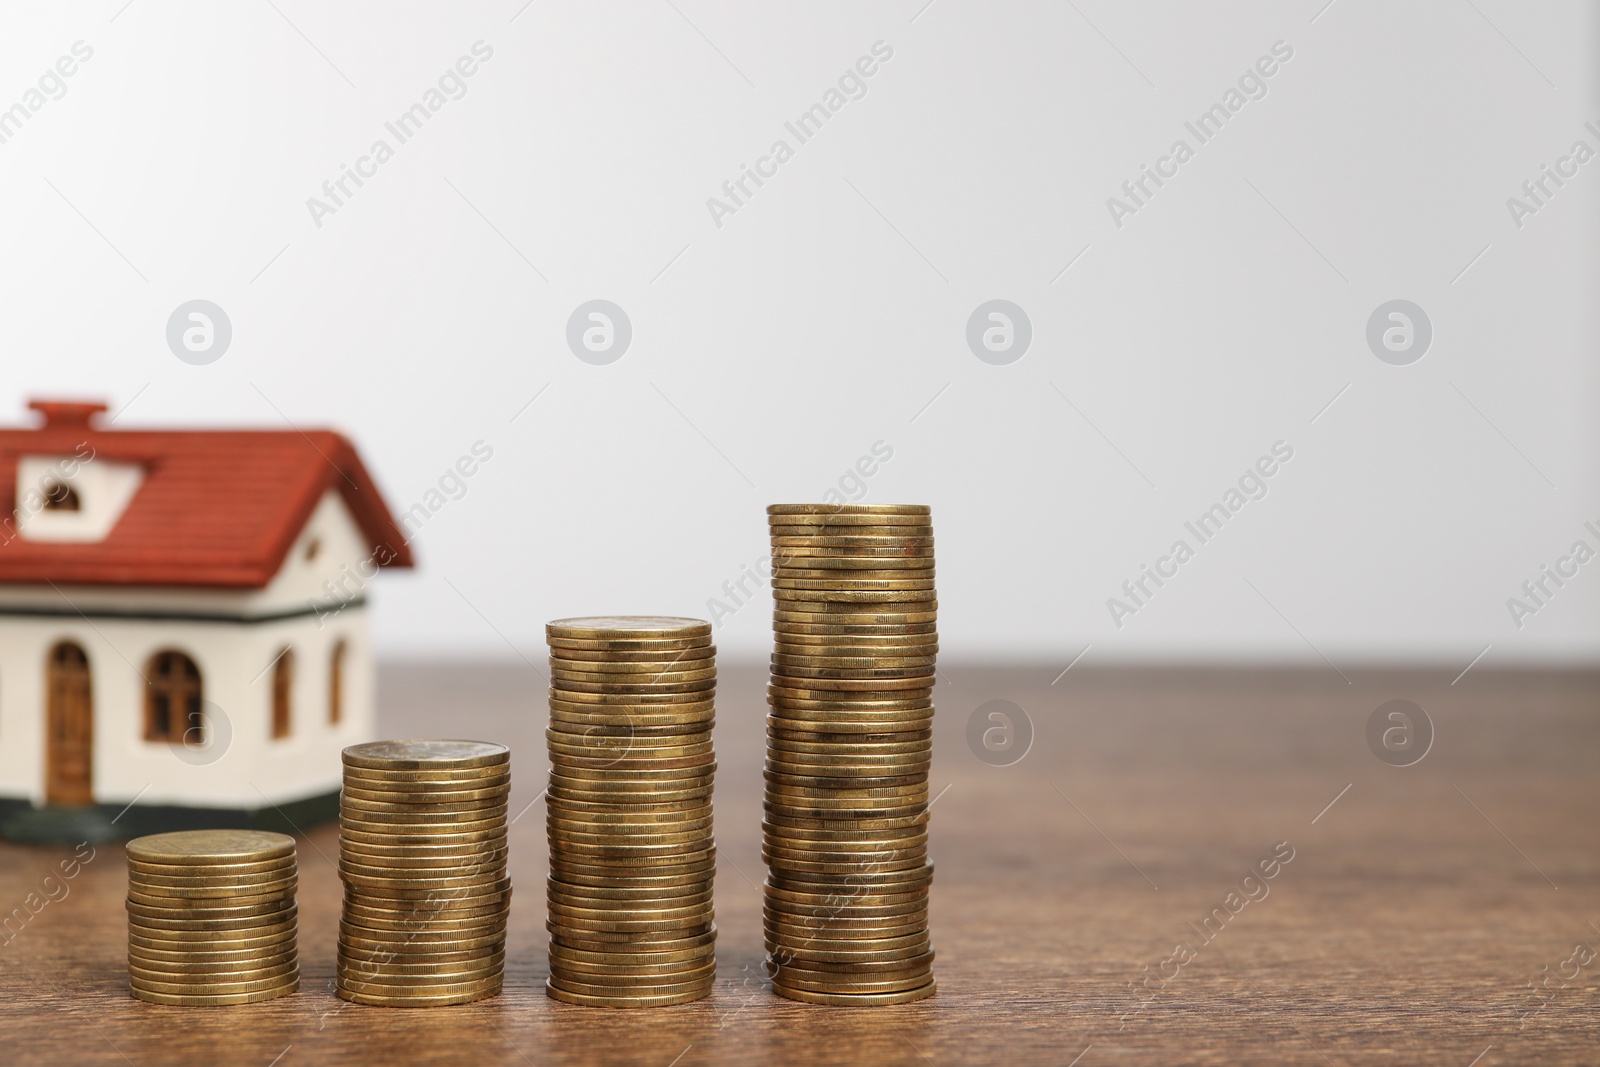 Photo of Mortgage concept. House model and stacks of coins on wooden table against white background, selective focus. Space for text